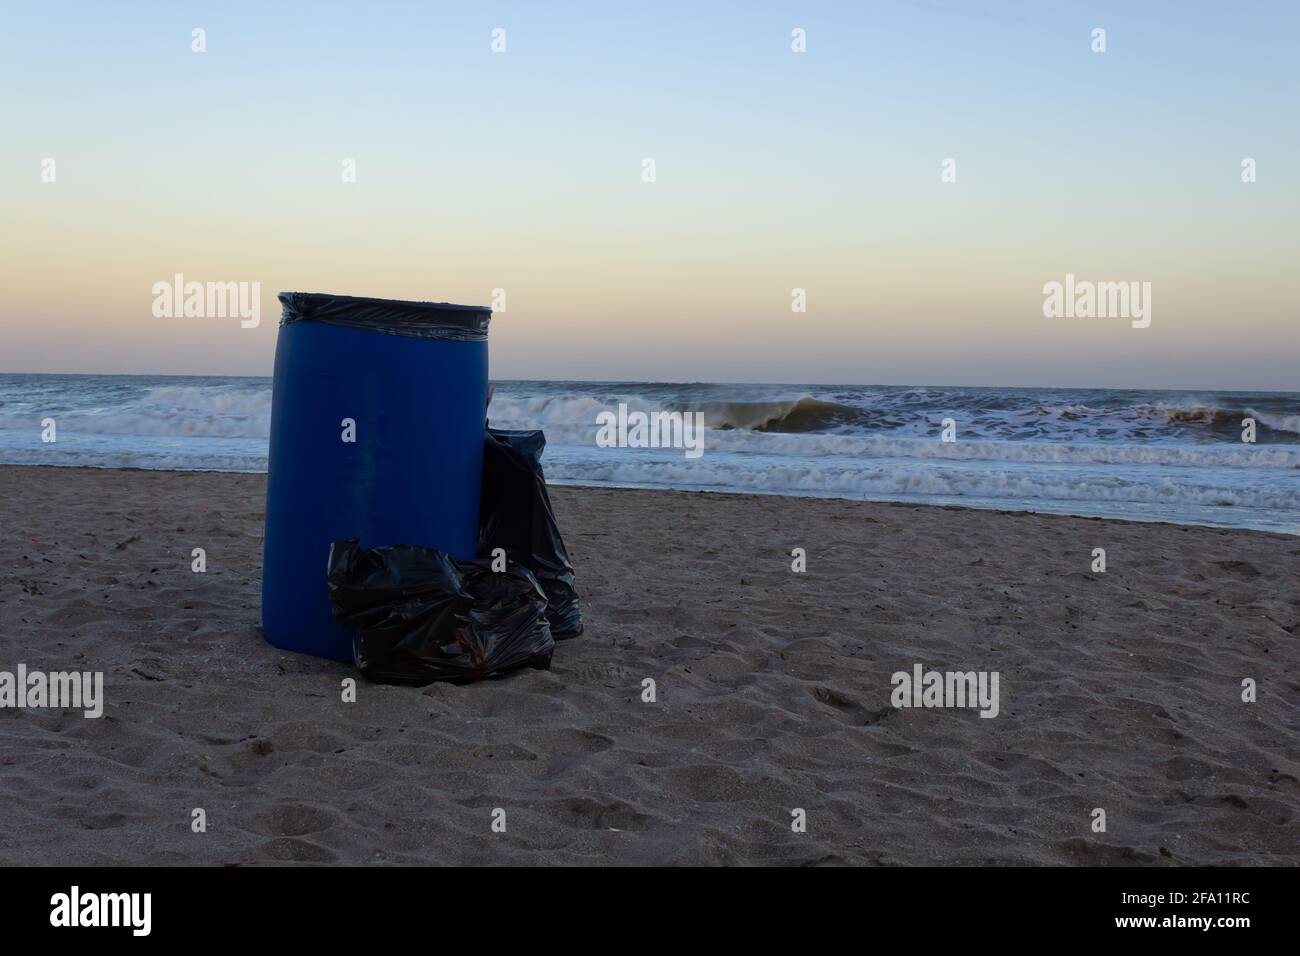 Trash can on the sand at sunrise. Stock Photo